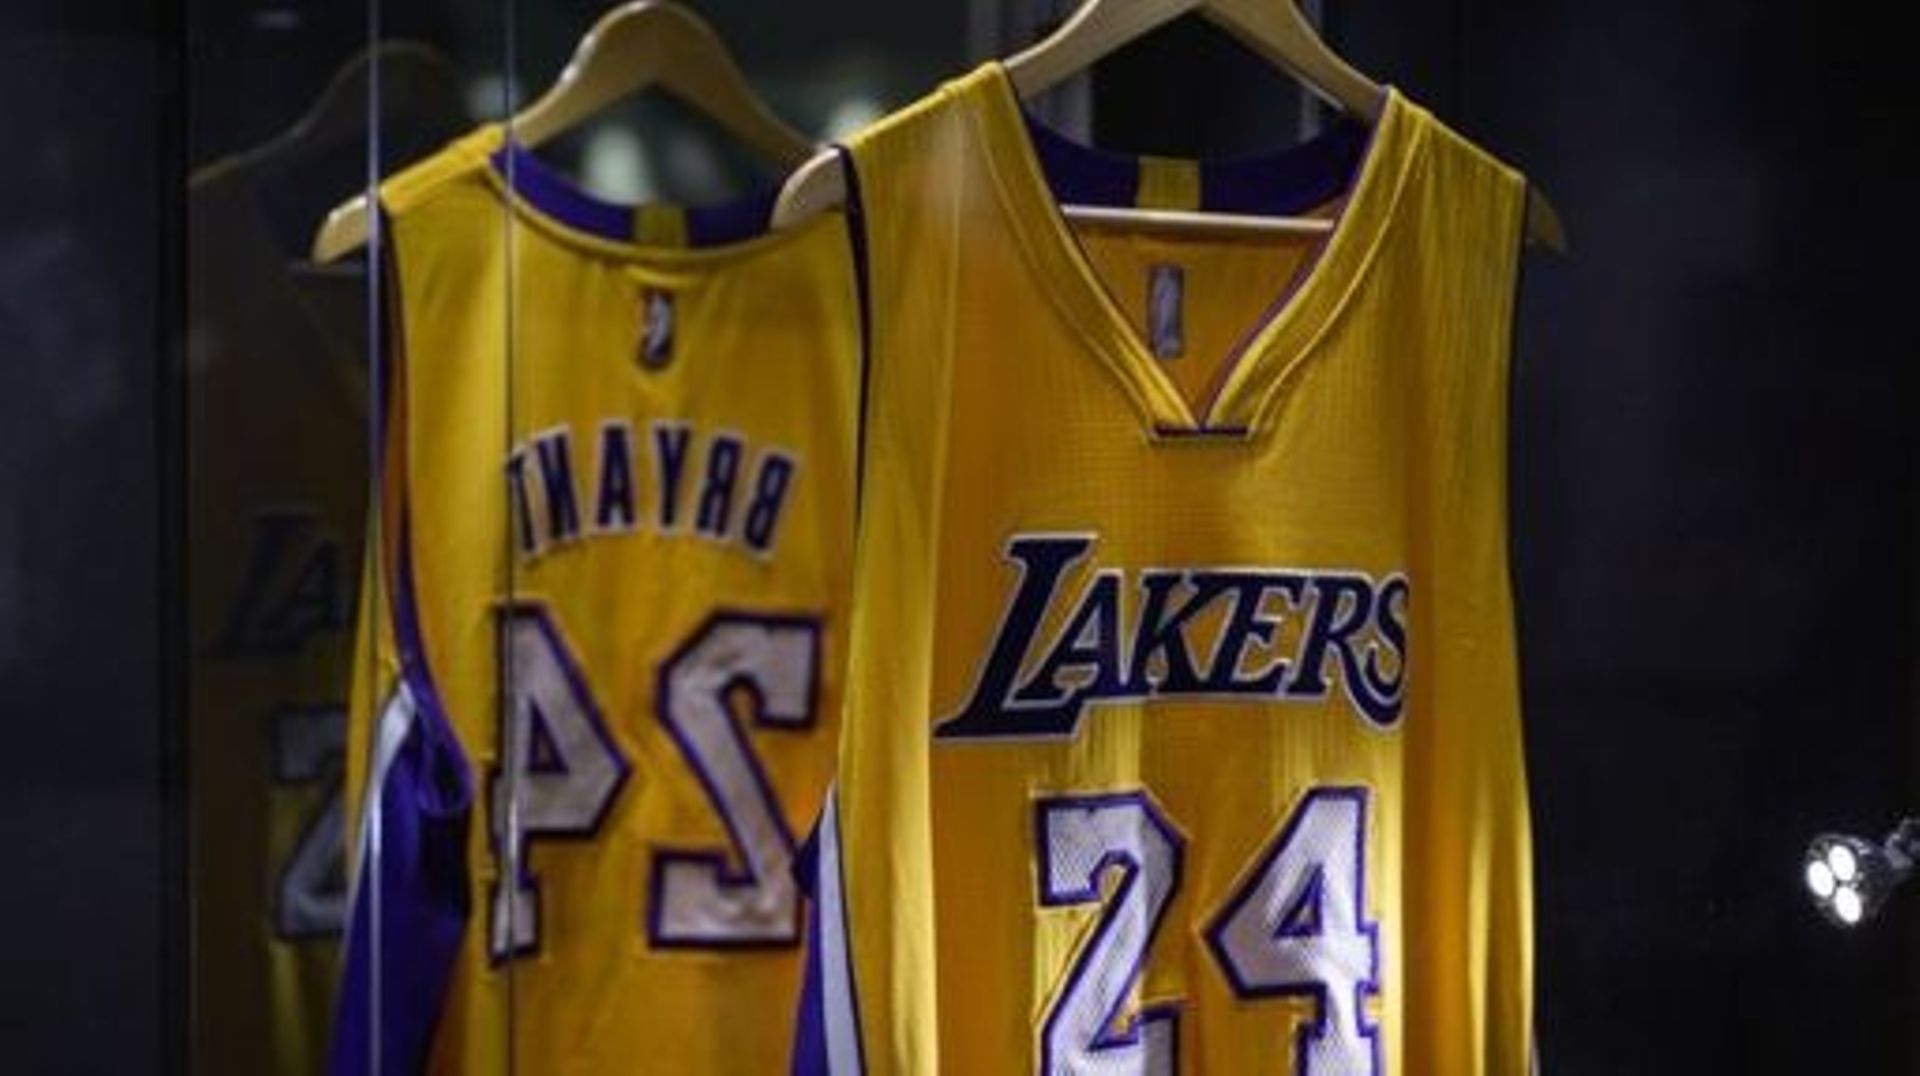 The jersey worn by US basketball player Kobe Bryant during his final NBA opening day (2015-2016 Season) is displayed as part of Sotheby's 'Invictus' sales in New York City on September 6, 2022.   ANGELA WEISS / AFP